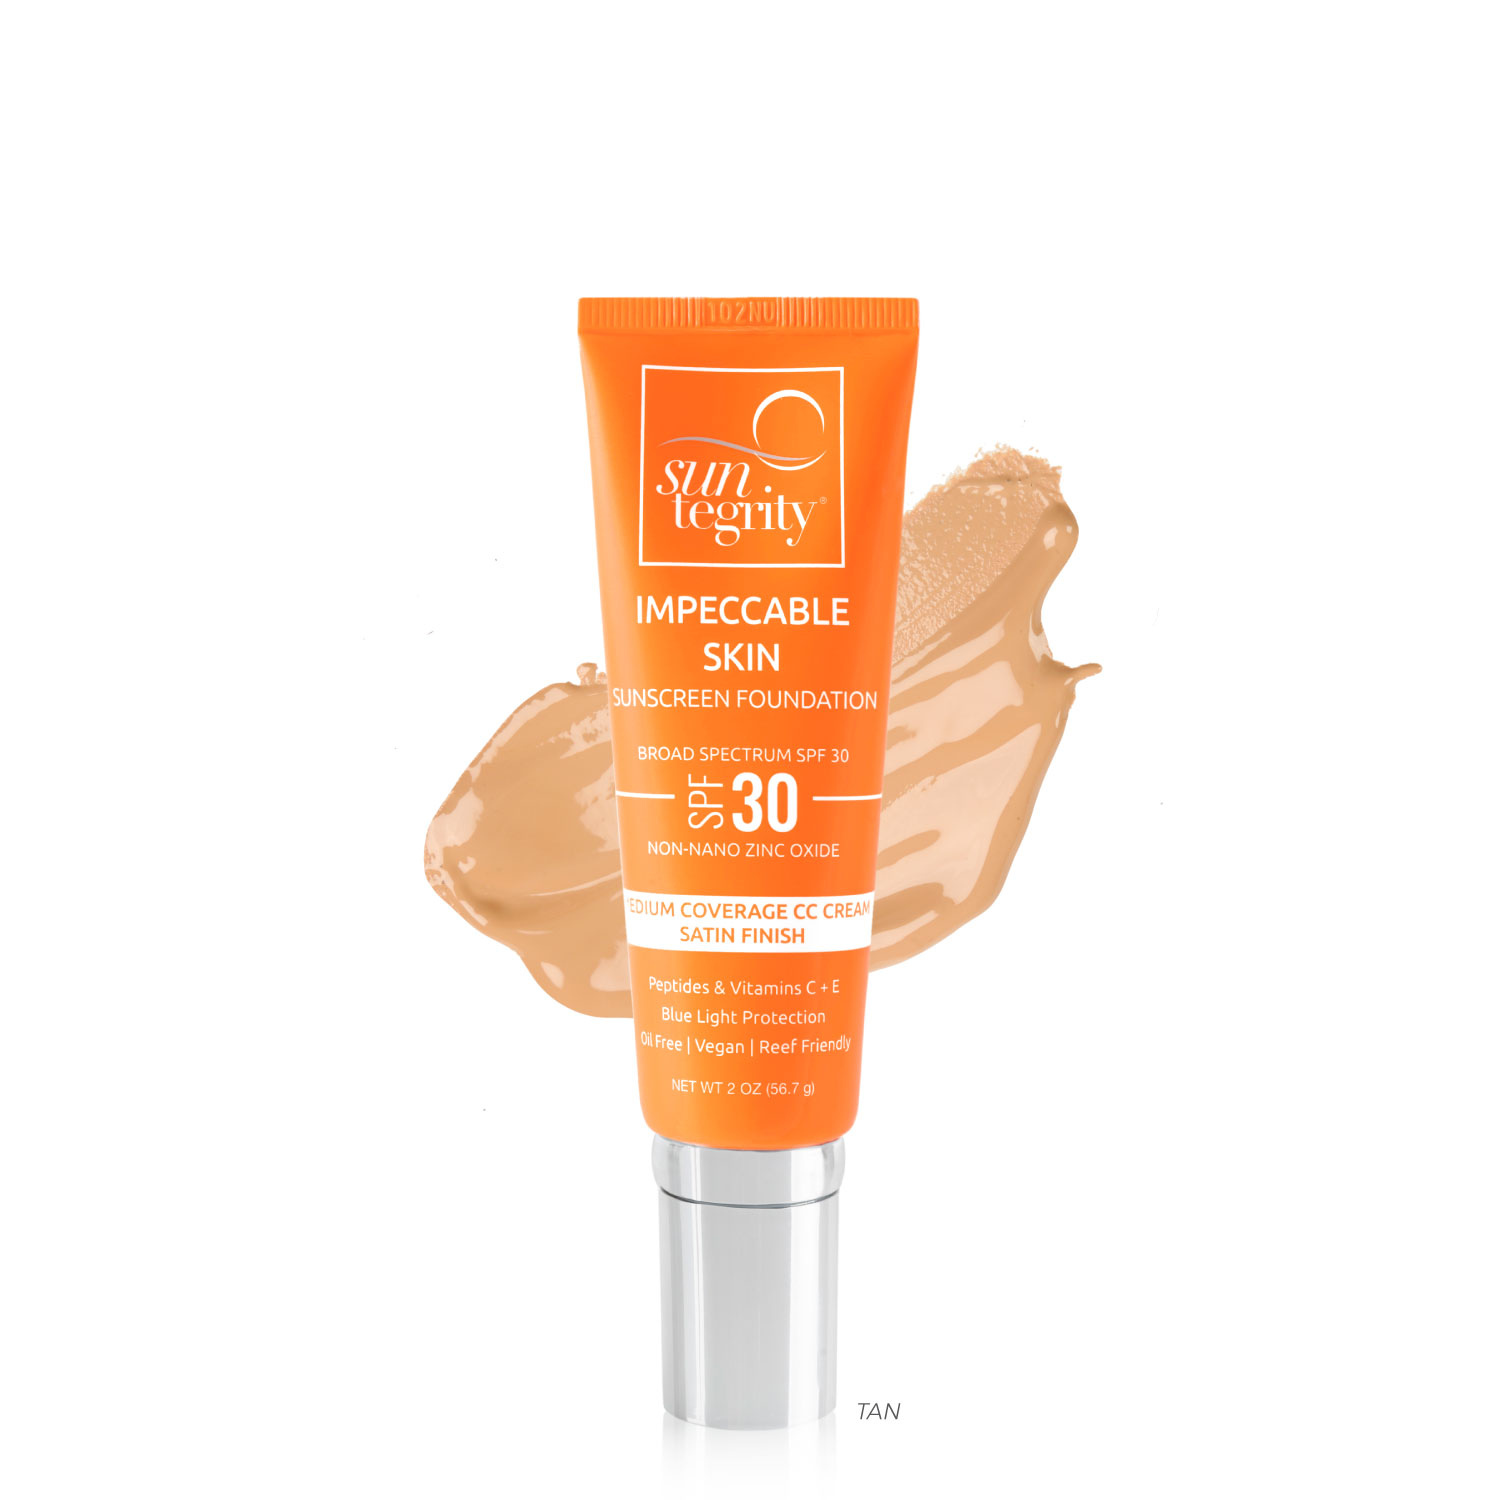 
  
  Suntegrity Impeccable Skin Sunscreen Foundation SPF 30 Tan- LORDE Beauty and Cosmetics
  
